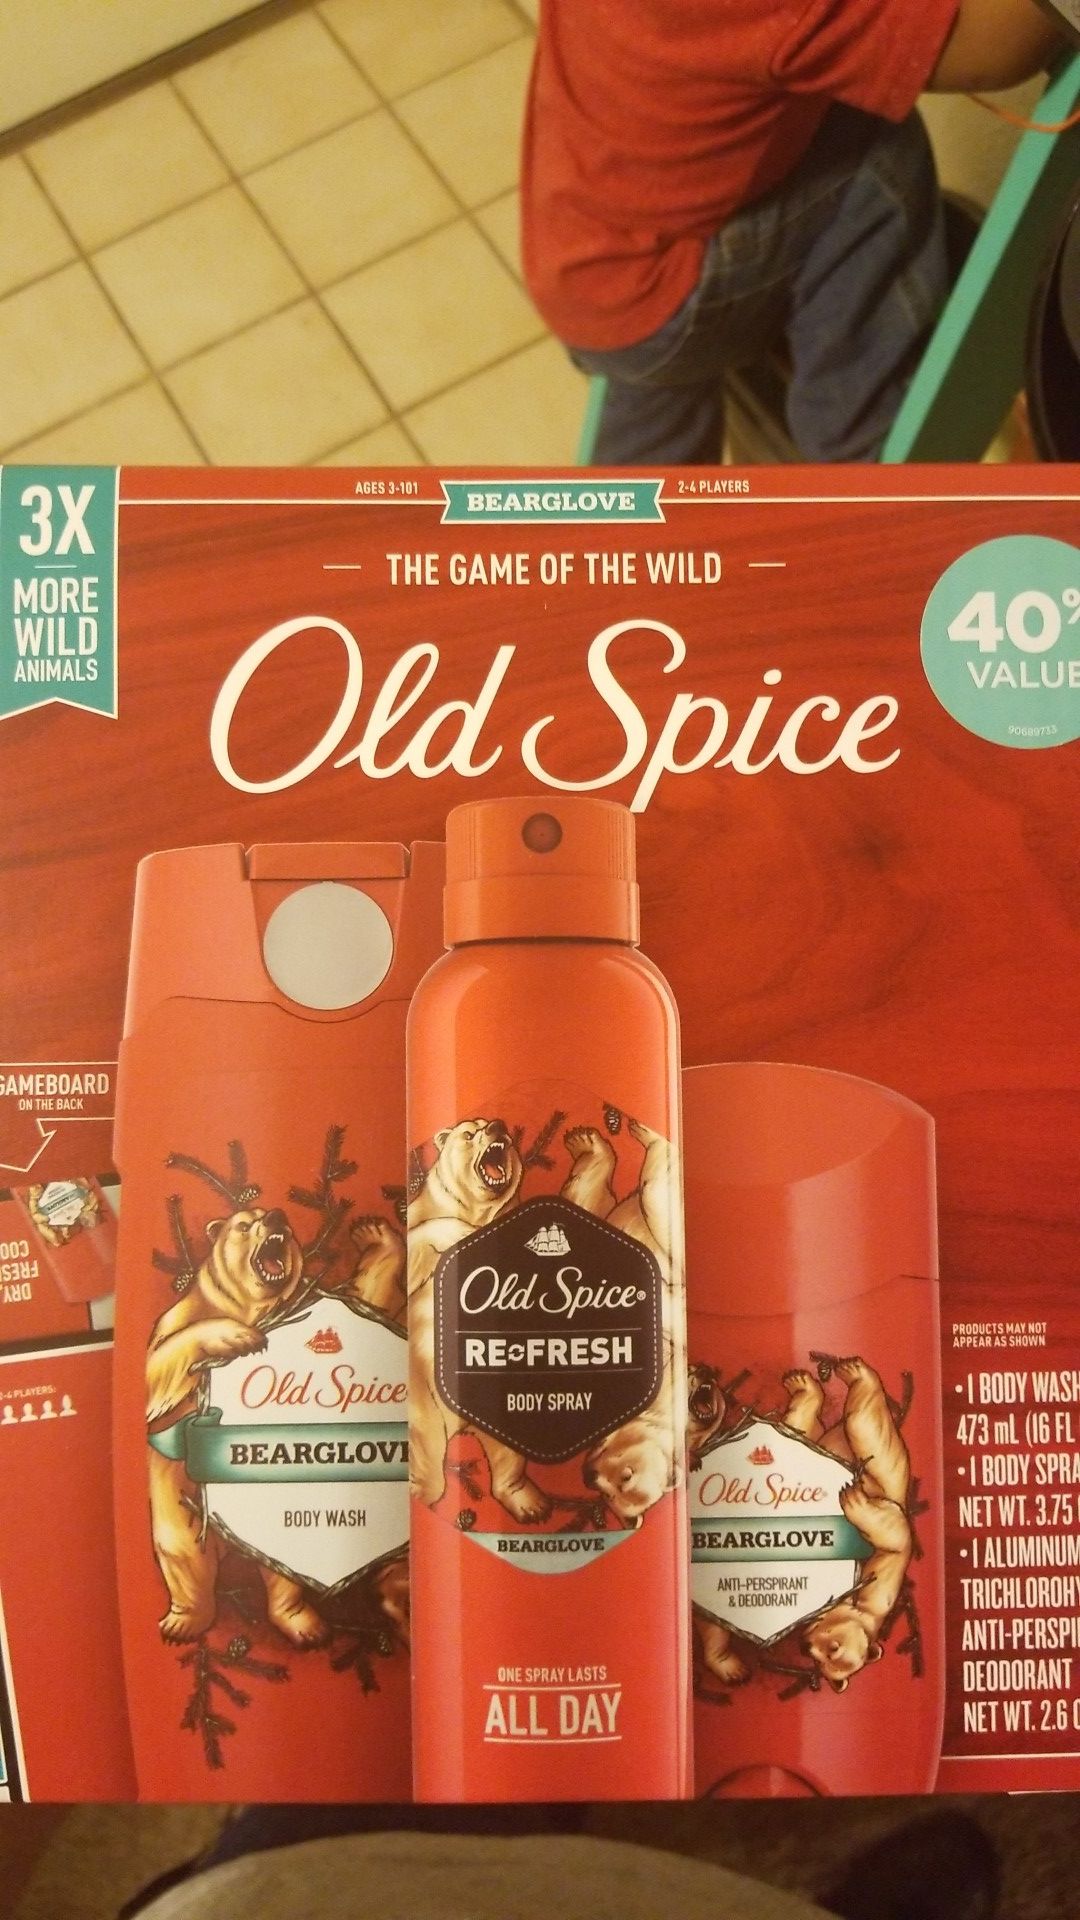 Old spice bearglove gift pack